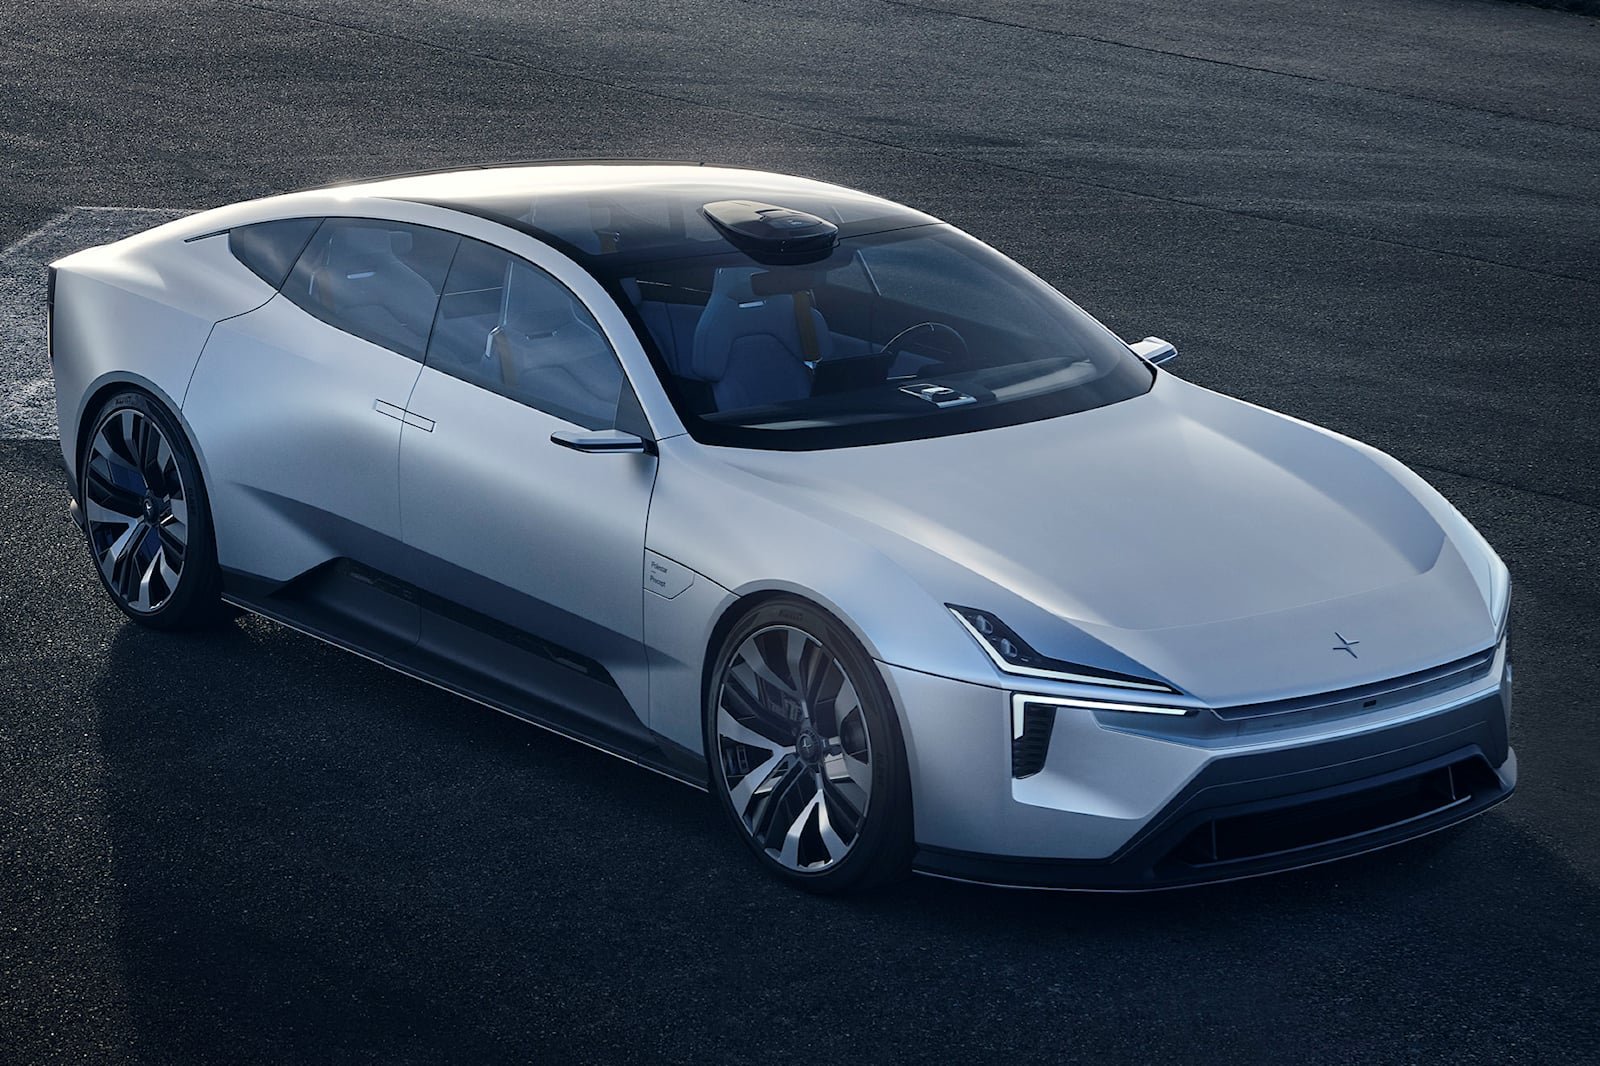 leaked:-polestar-3-details-show-it-will-be-serious-threat-to-tesla